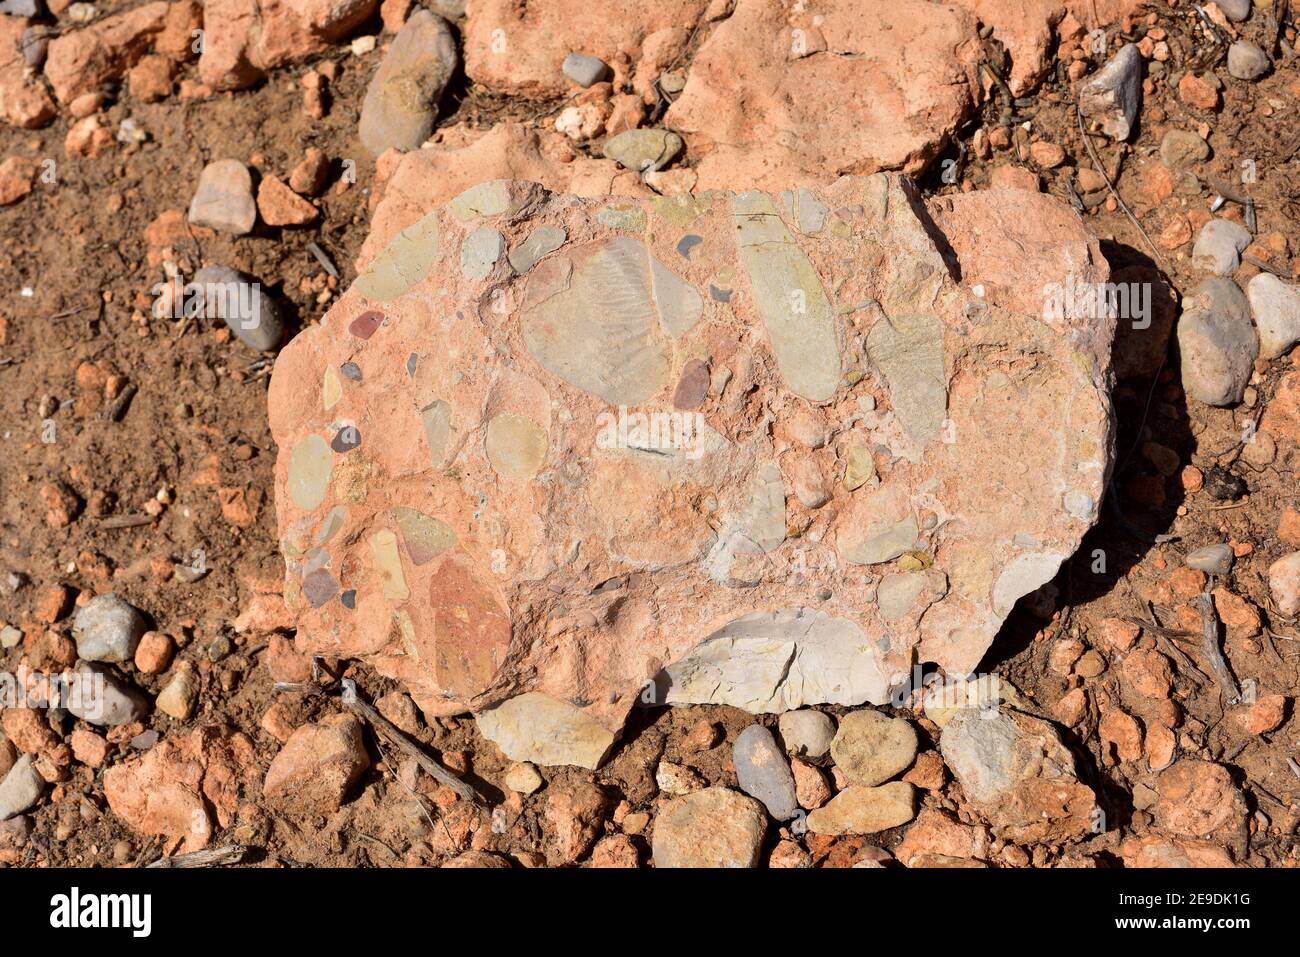 Conglomerate is a clastic sedimentary rock. This sample comes from L'Ametlla de Mar, Tarragona province, Catalonia, Spain. Stock Photo